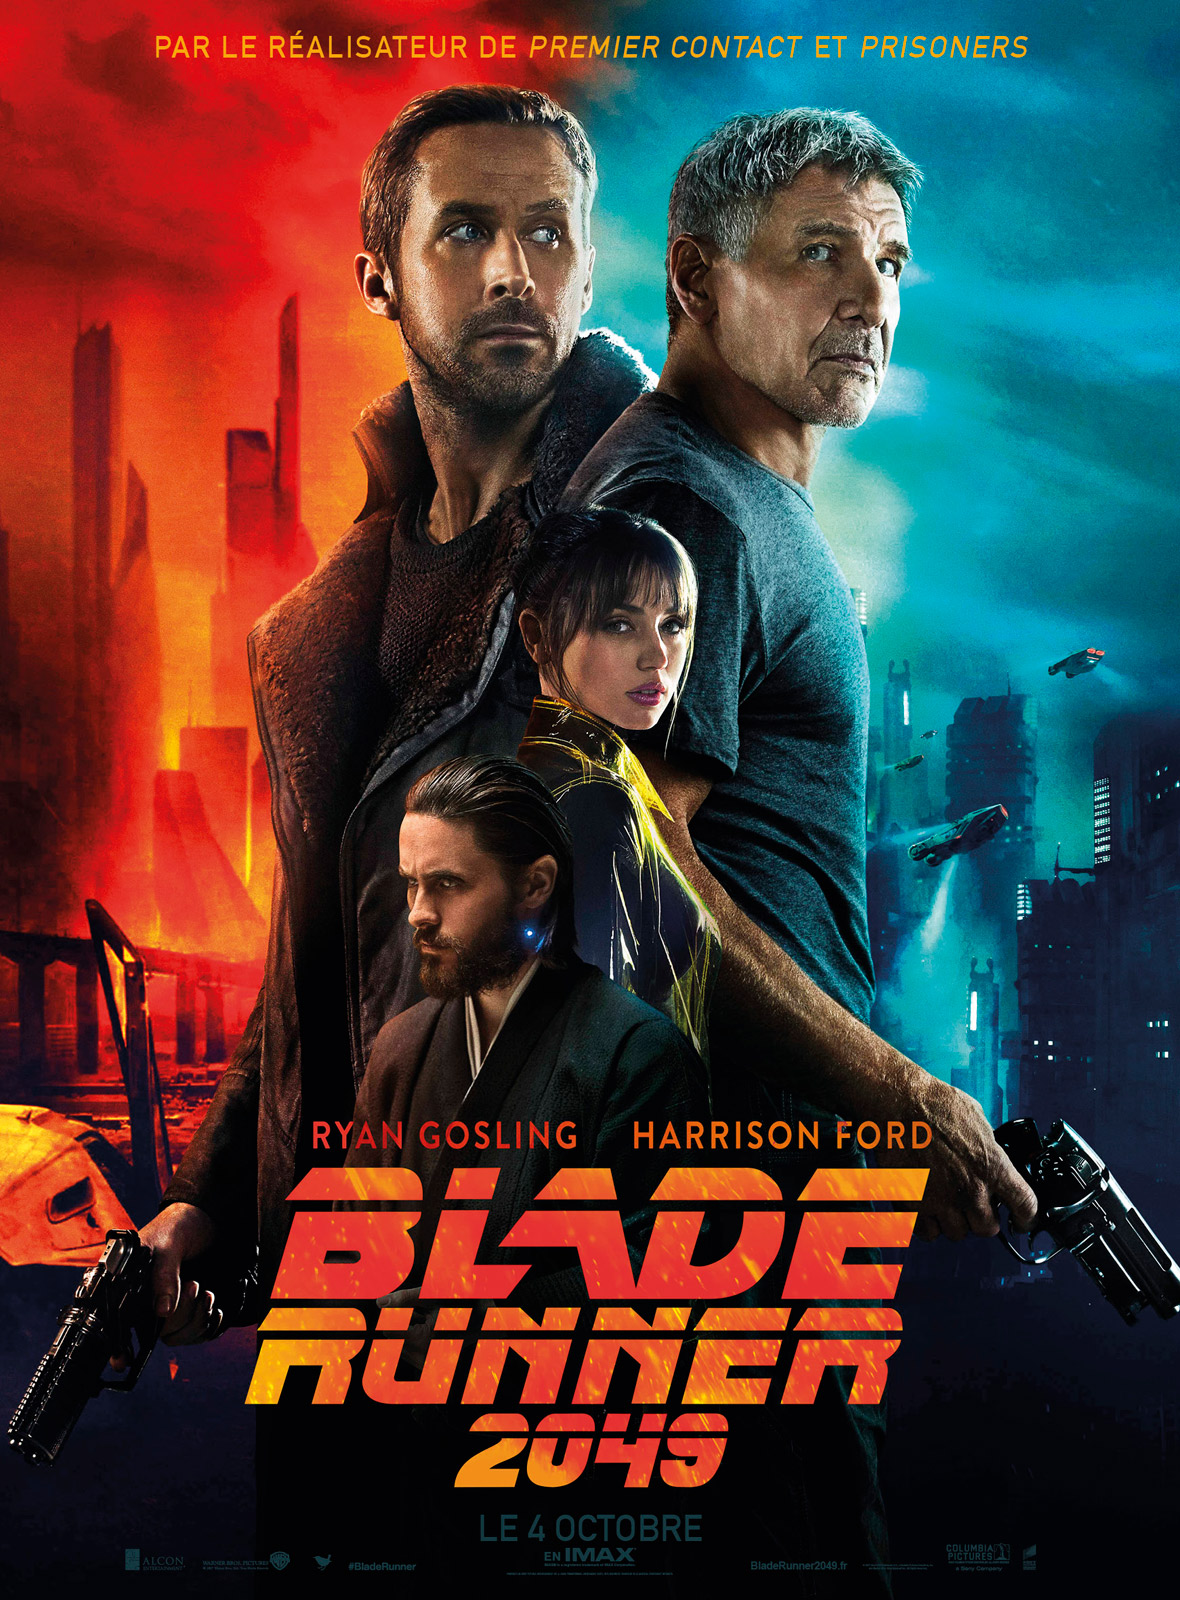 Blade Runner 2049 © Sony Pictures